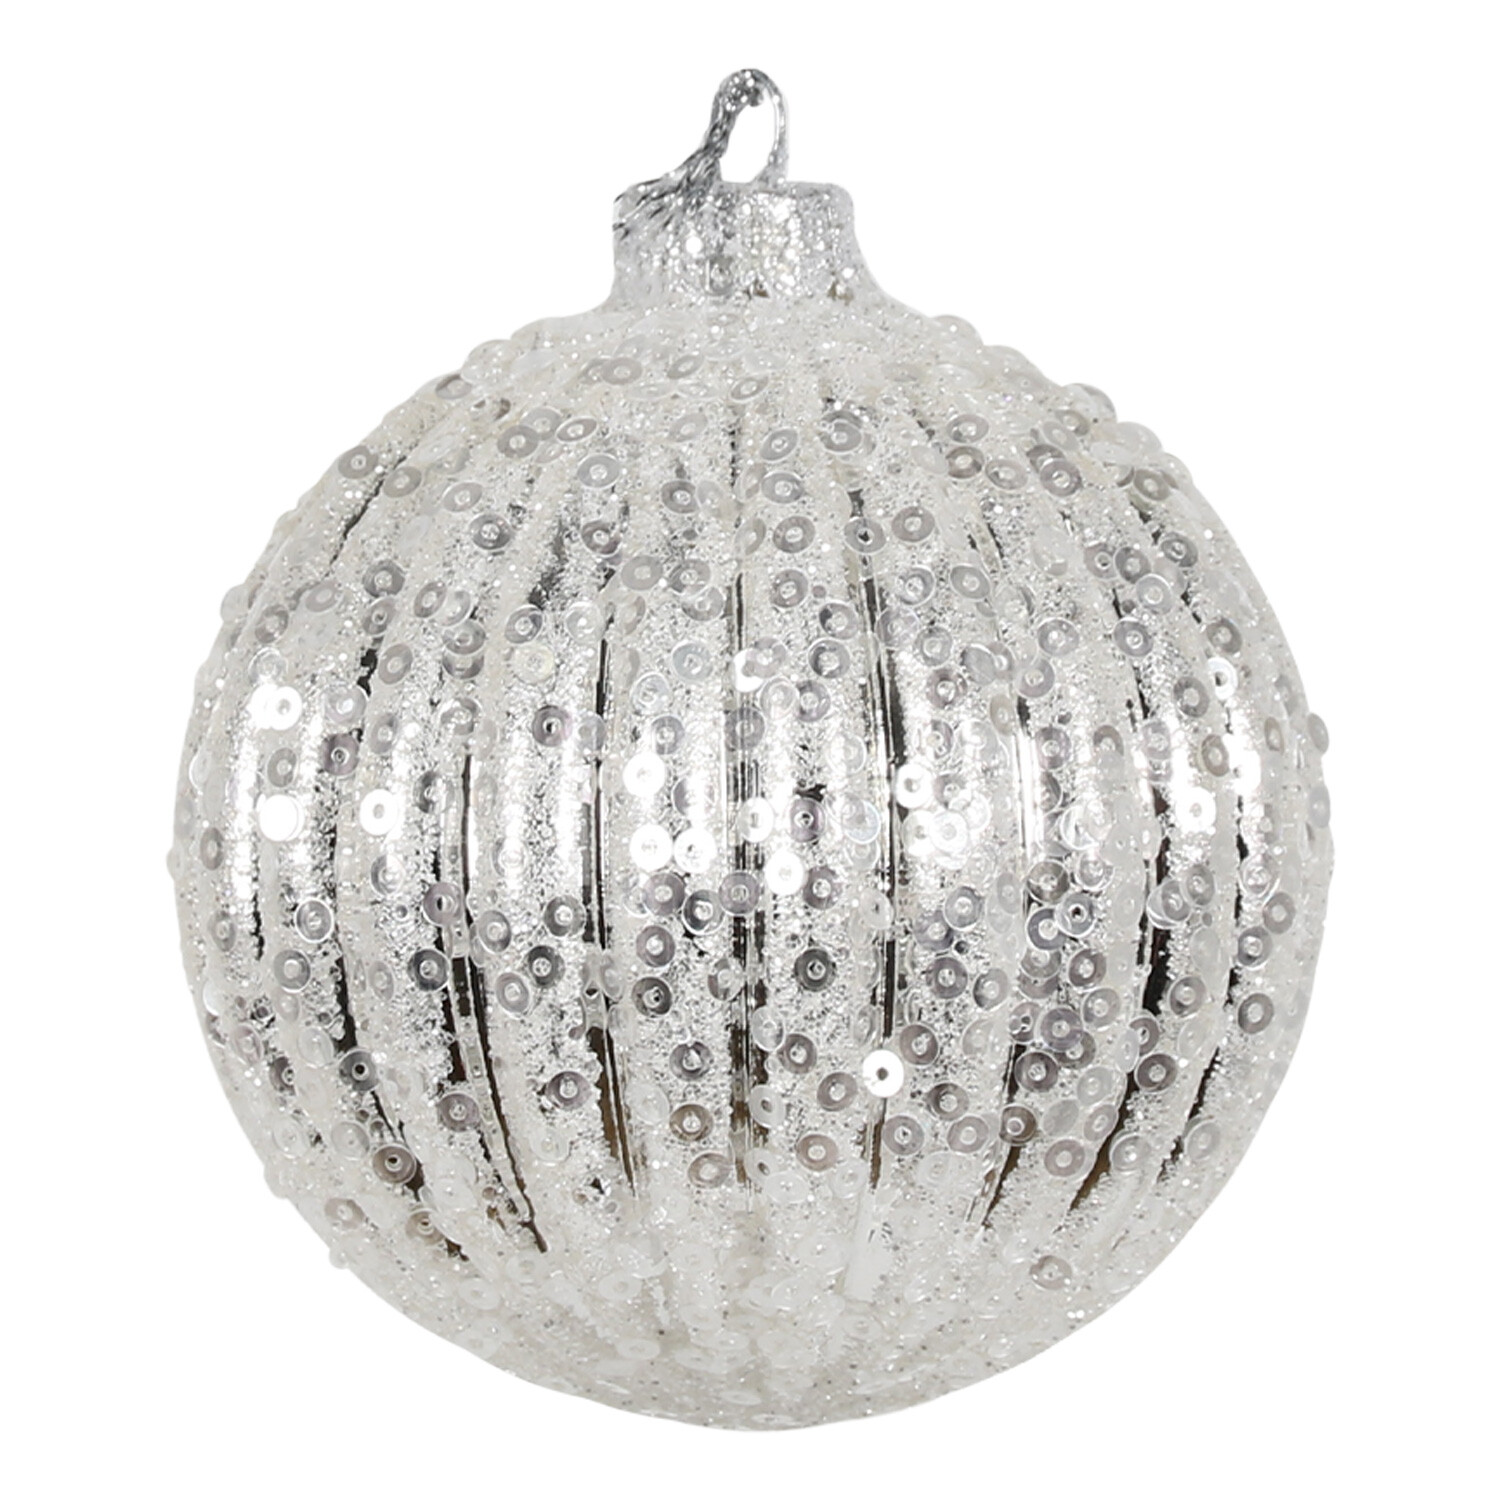 Single Frosted Fairytale Silver Ridged Bauble in Assorted styles Image 2